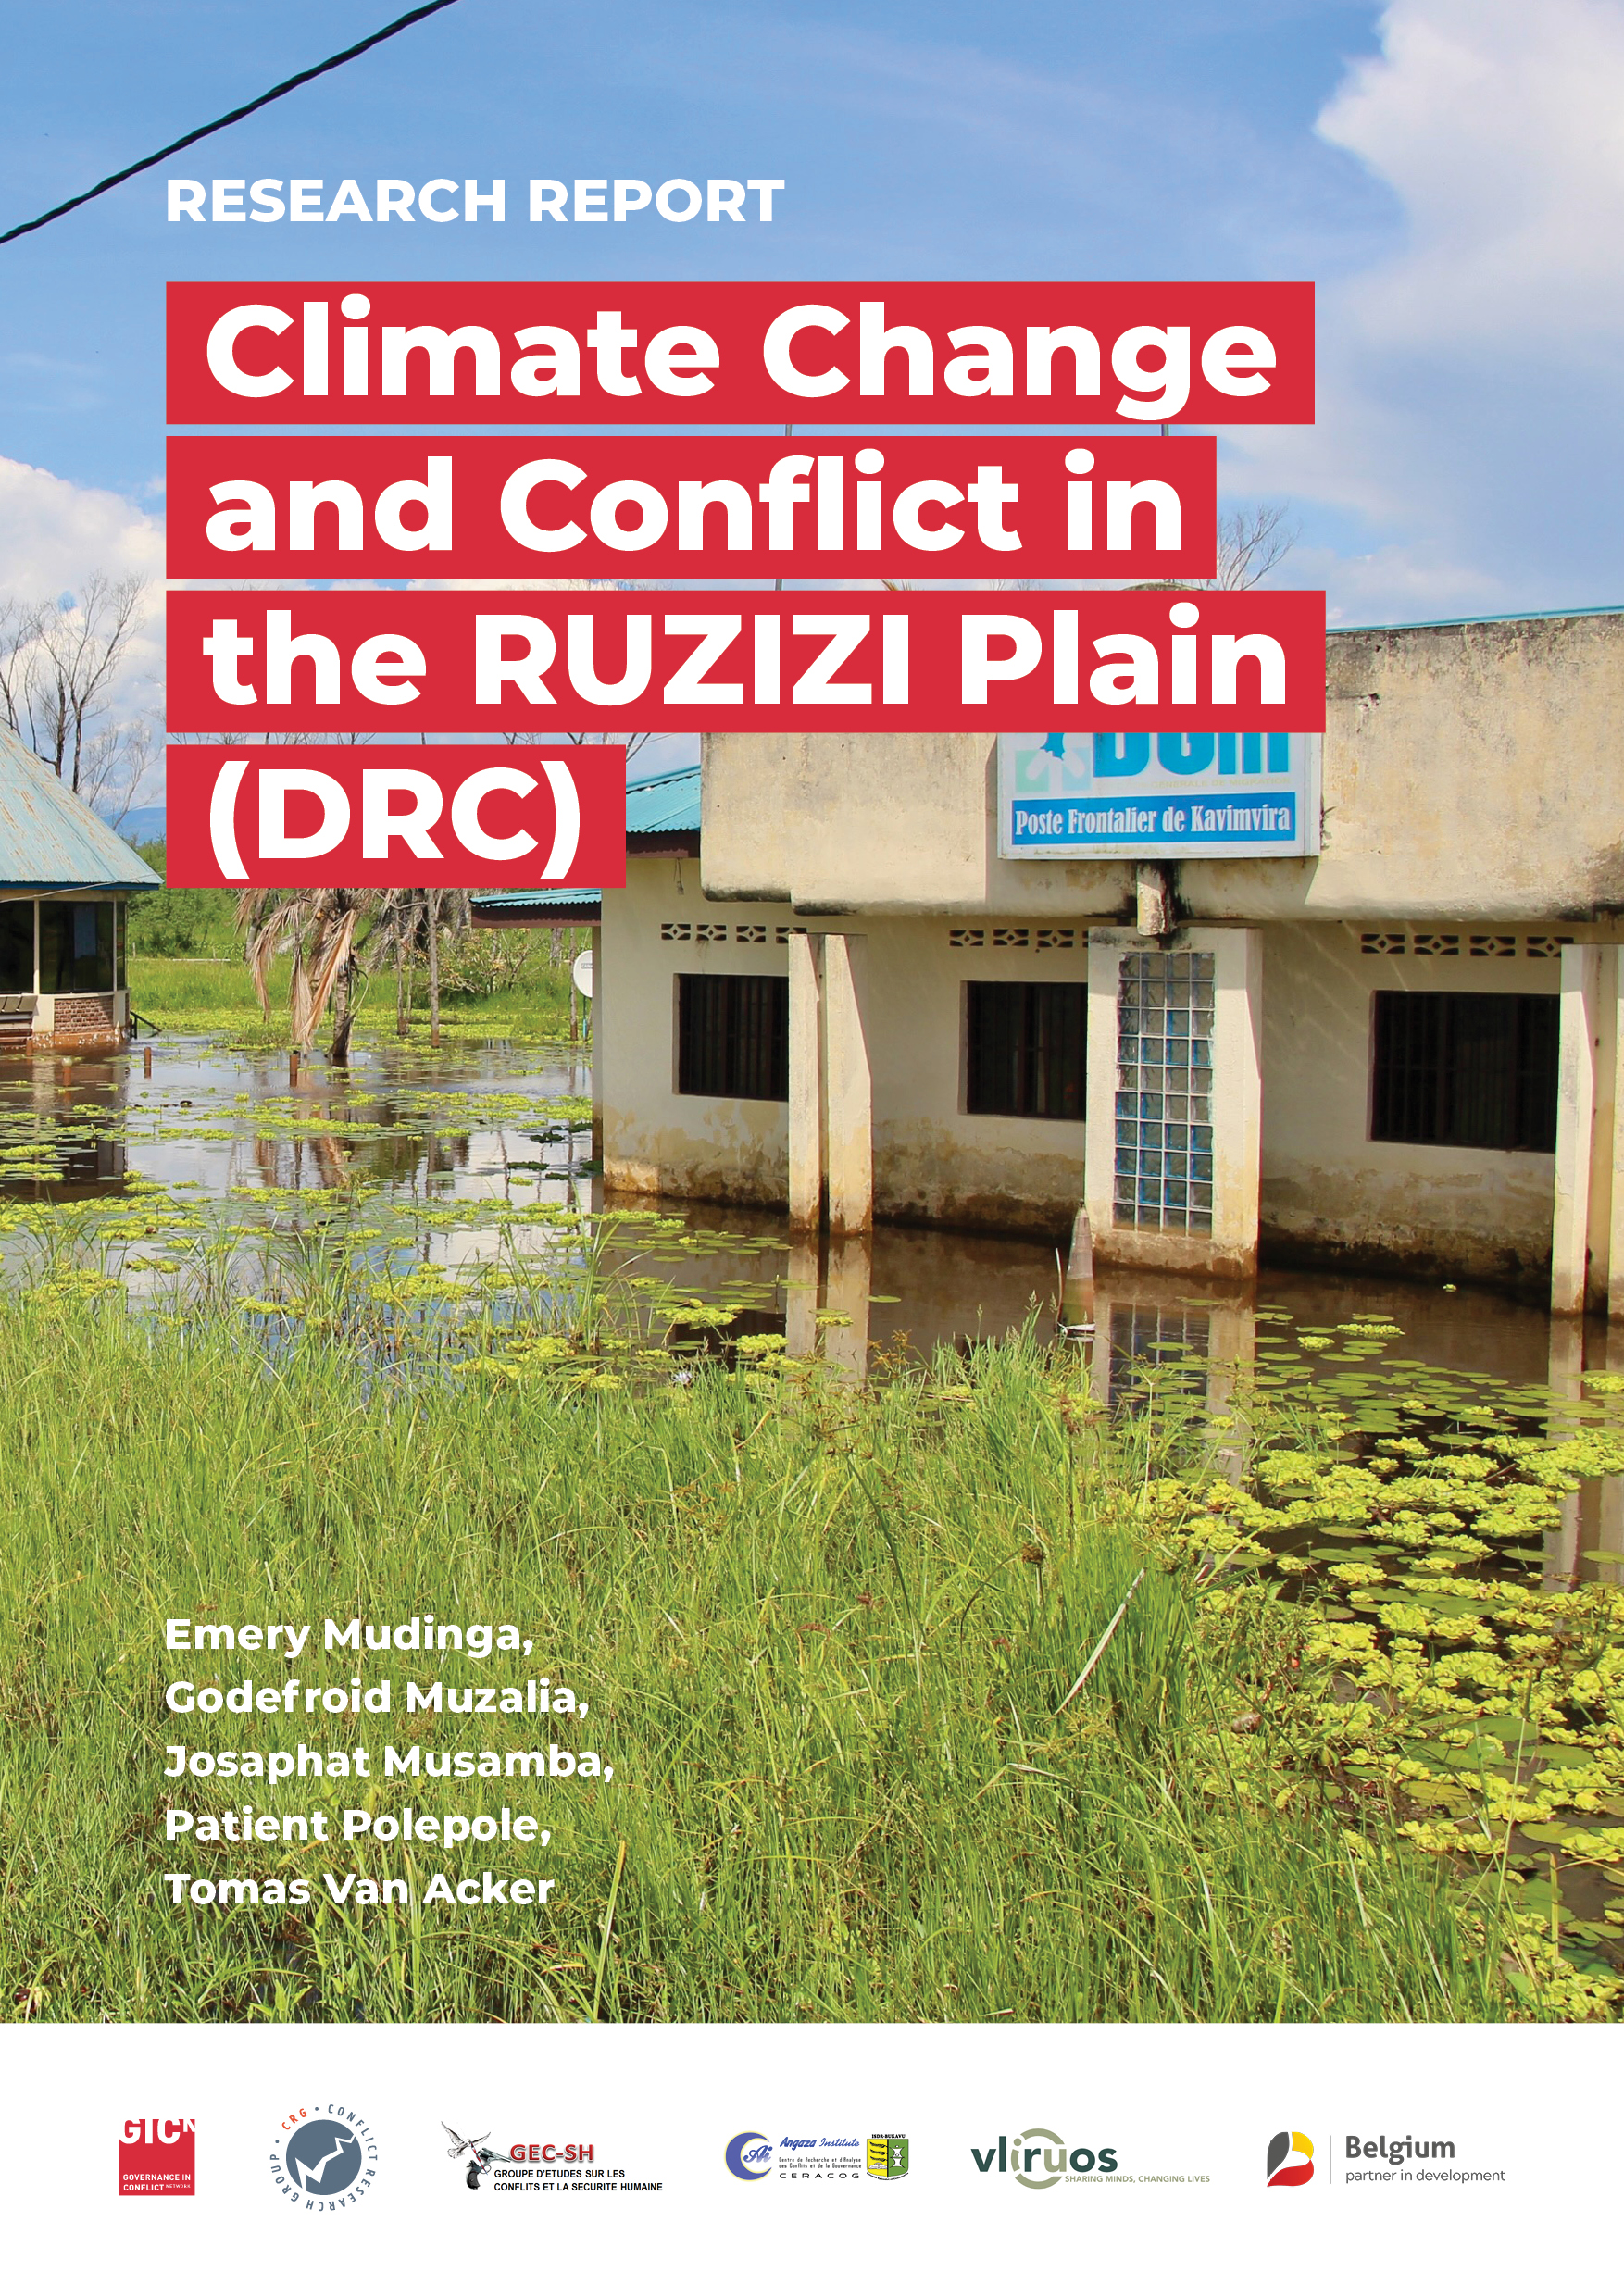 Research_Report_Climate Change and Conflict in the RUZIZI Plain (DRC)_4